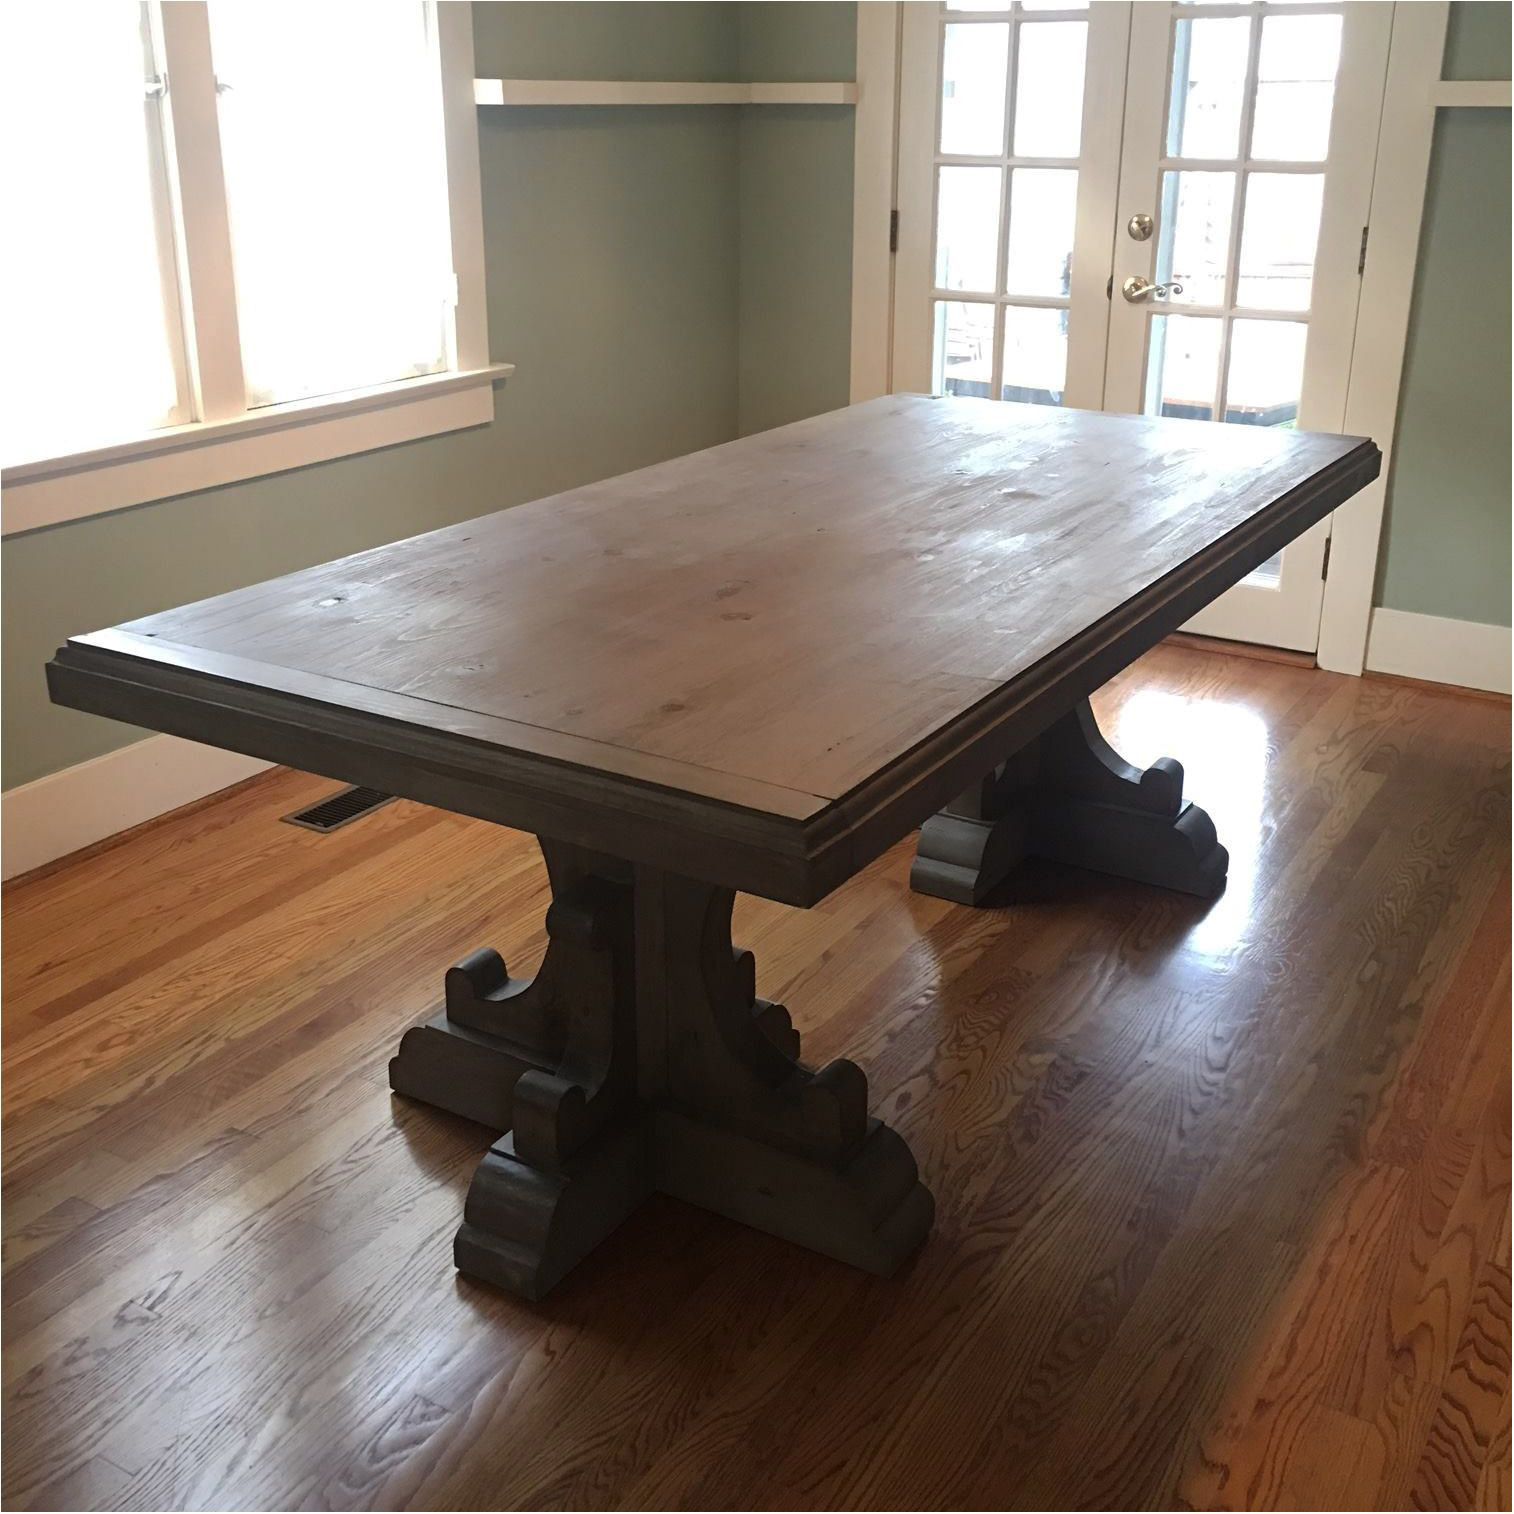 hardwood flooring stamford ct of great old mill road table company custom dining tables for stamford within incredible custom dining tables larry st john los angeles custom furniture frightening points custom wood dining